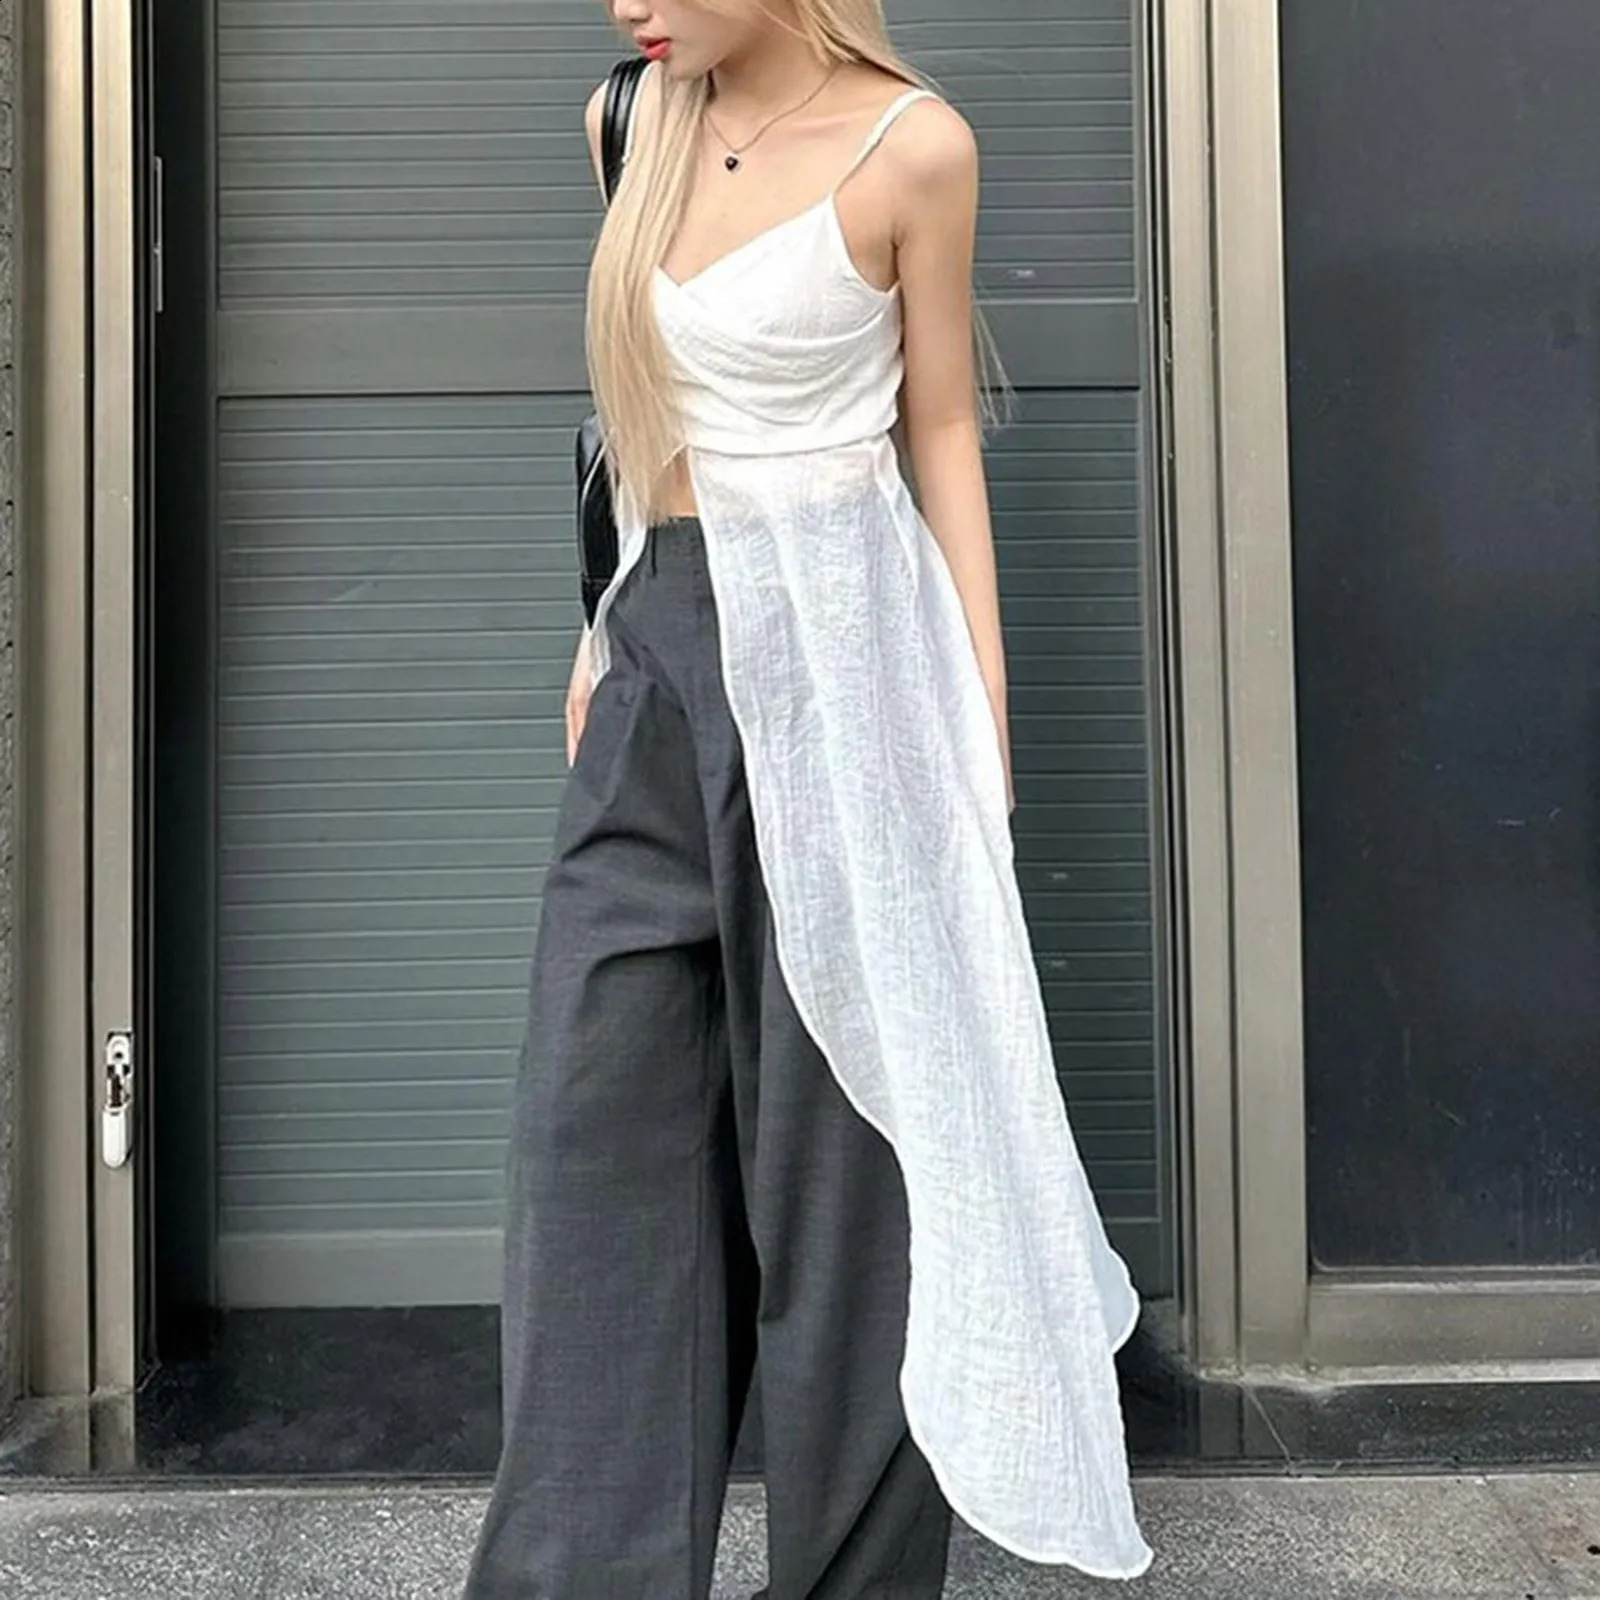 High Street Women Y2k Tank Tops Solid Color Sleeveless Camisole Sexy Spaghetti Strap Low Cut Vest Summer Party Club Top 240327